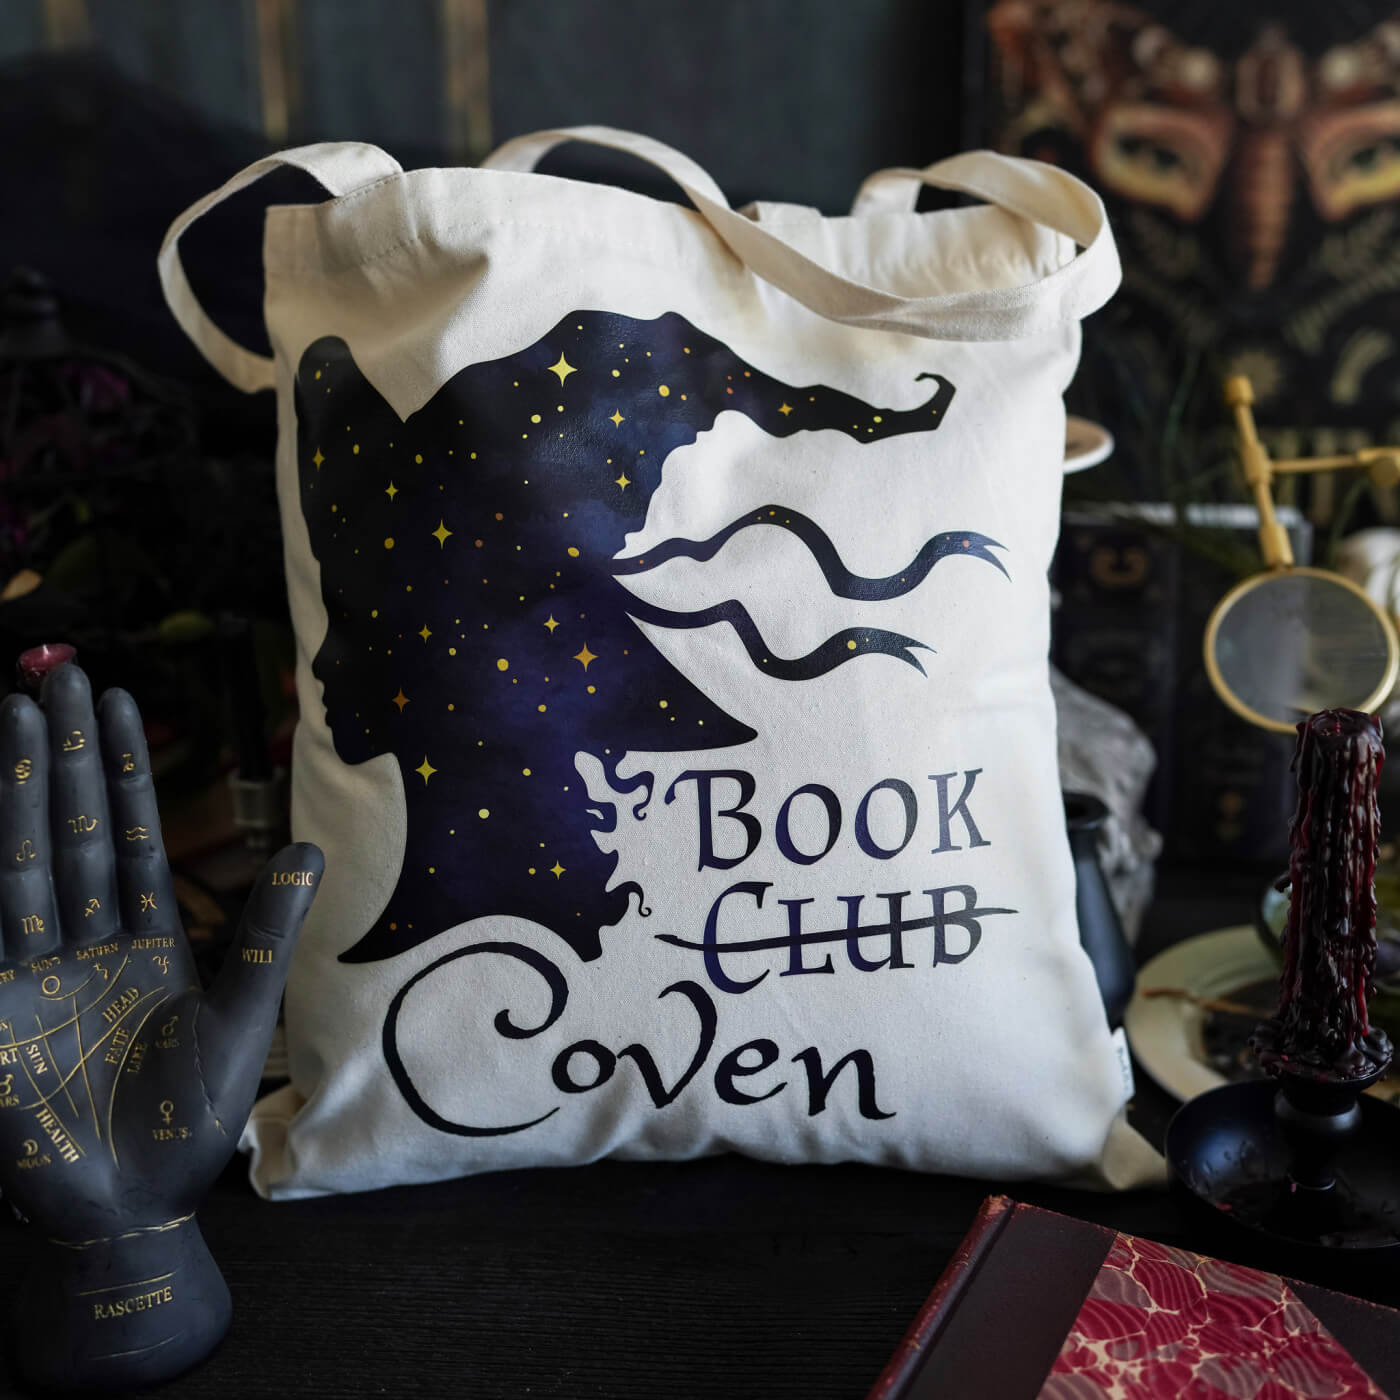 Book Coven Tote sold by LitJoy with a witchy silhouette and reads "Book Club Coven" with "club" crossed out